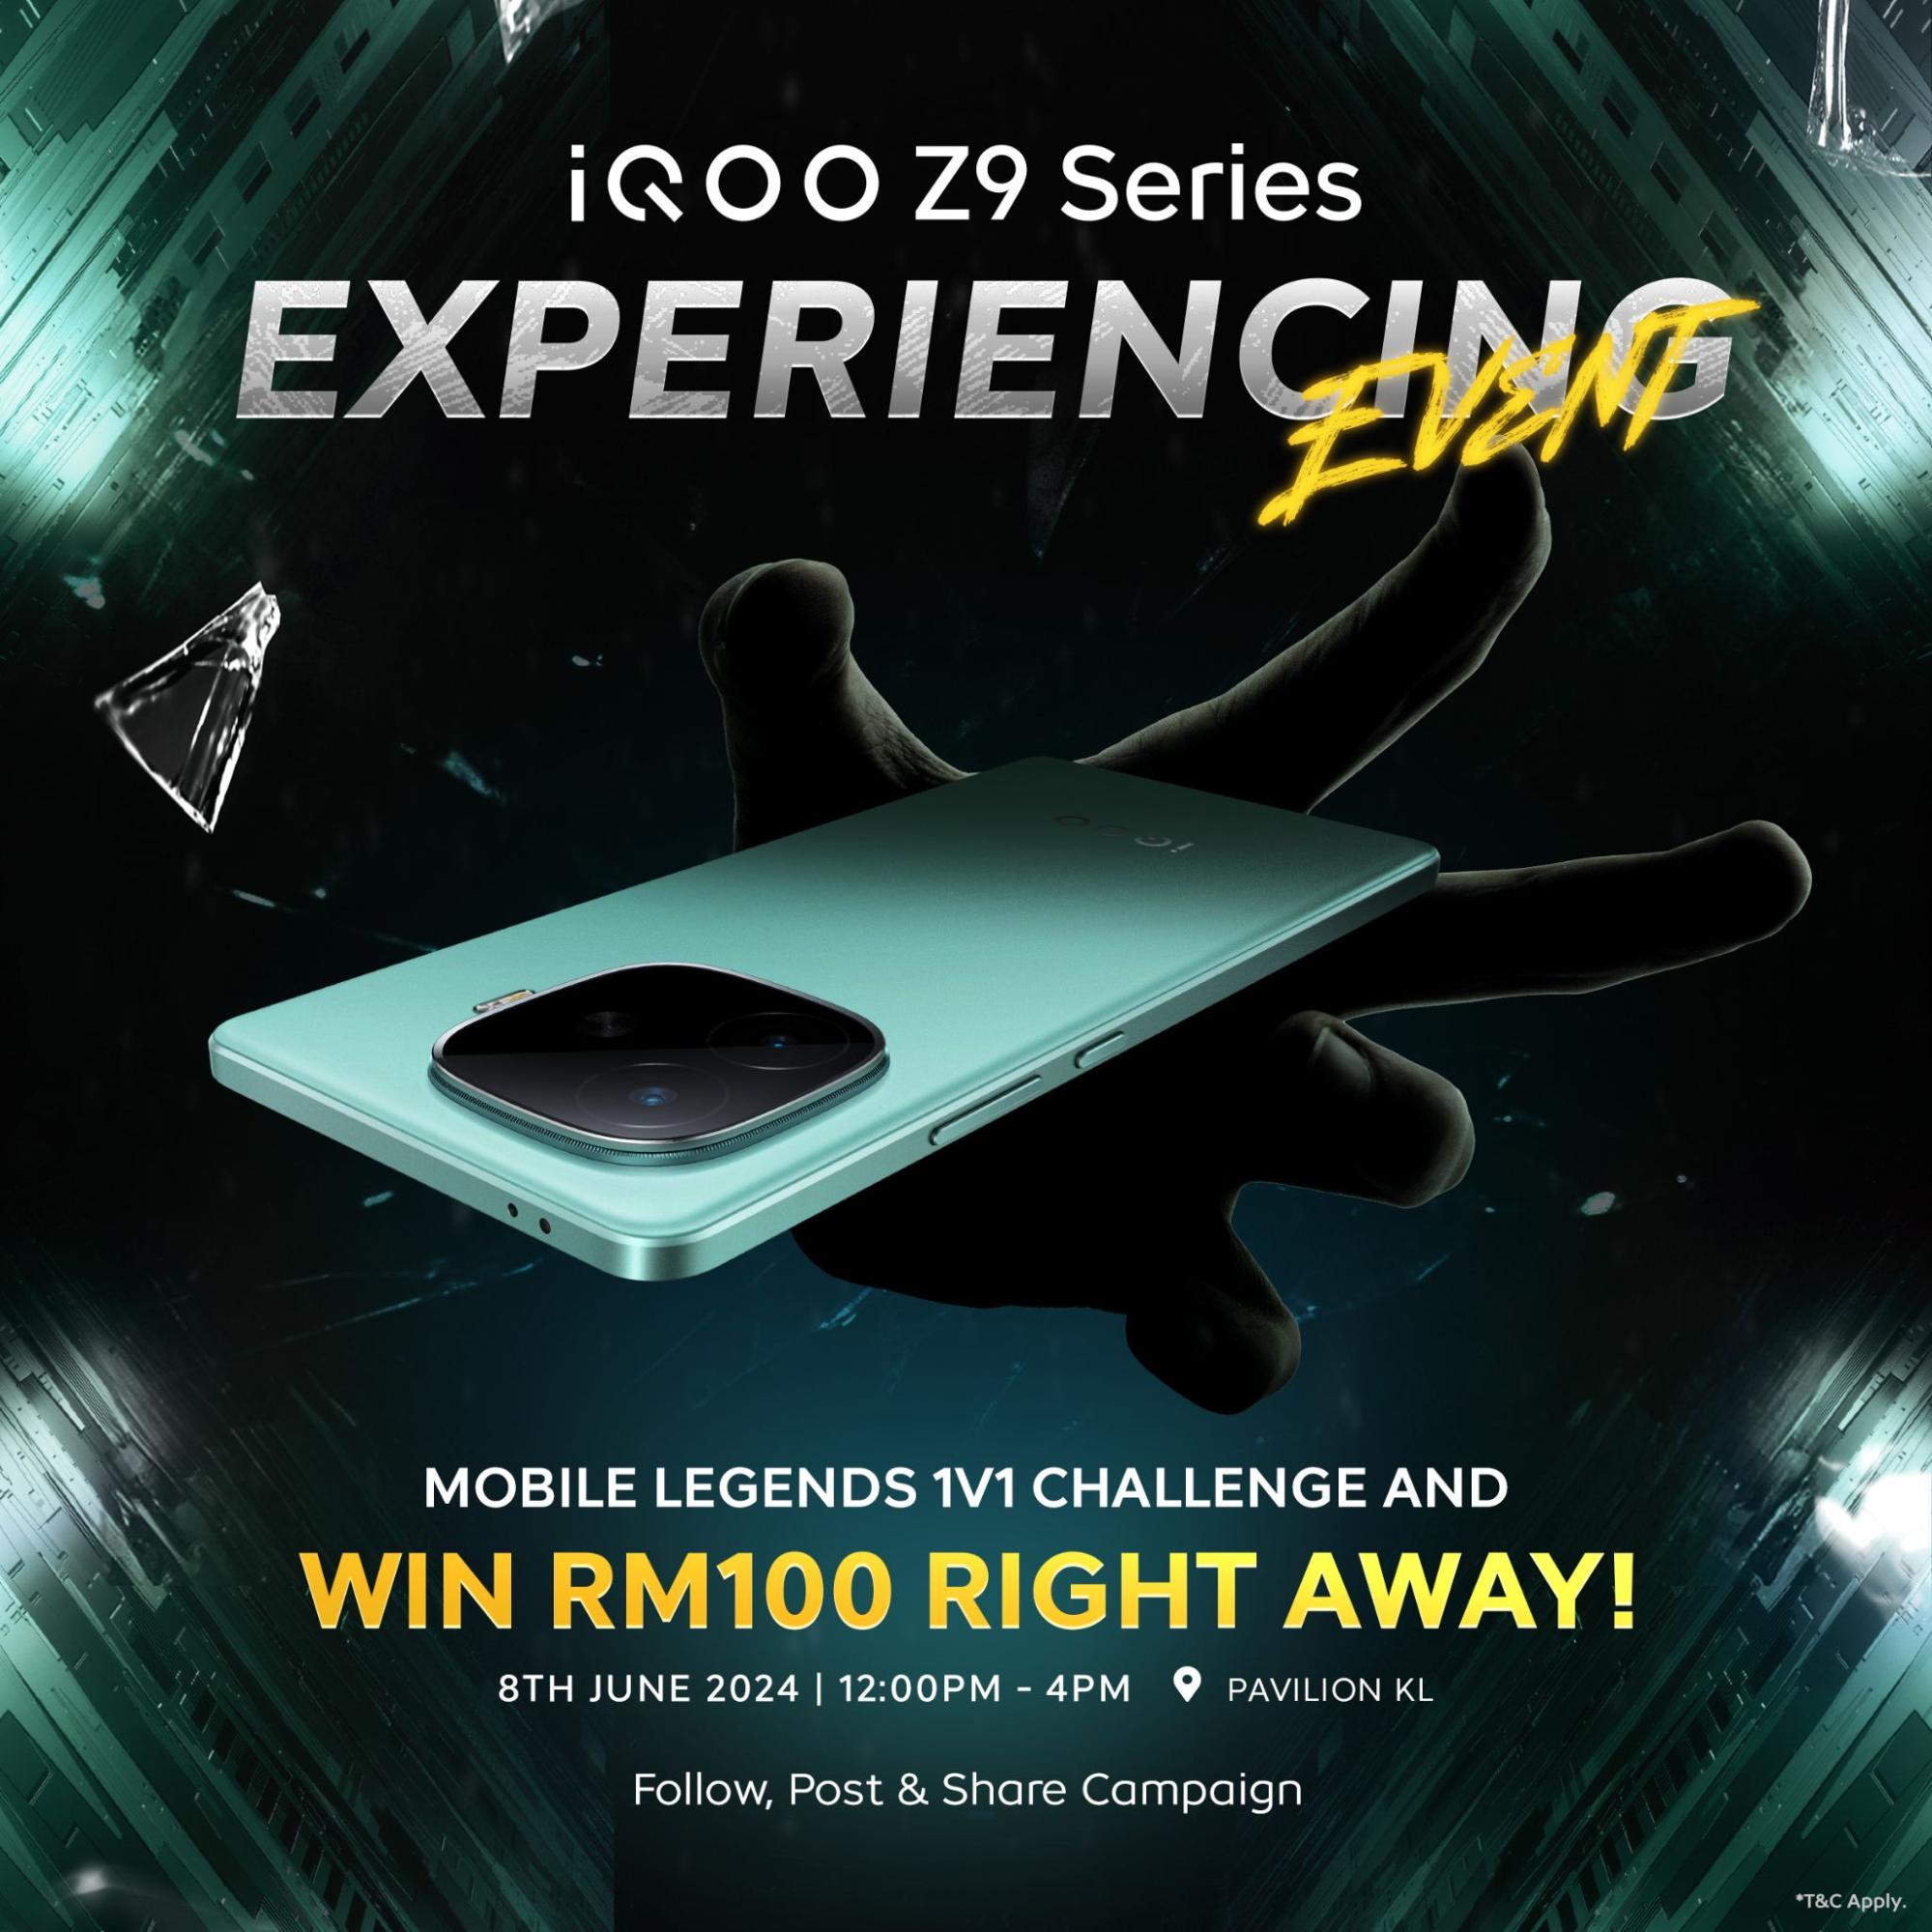 iQOO Z9 Series Experiencing Event